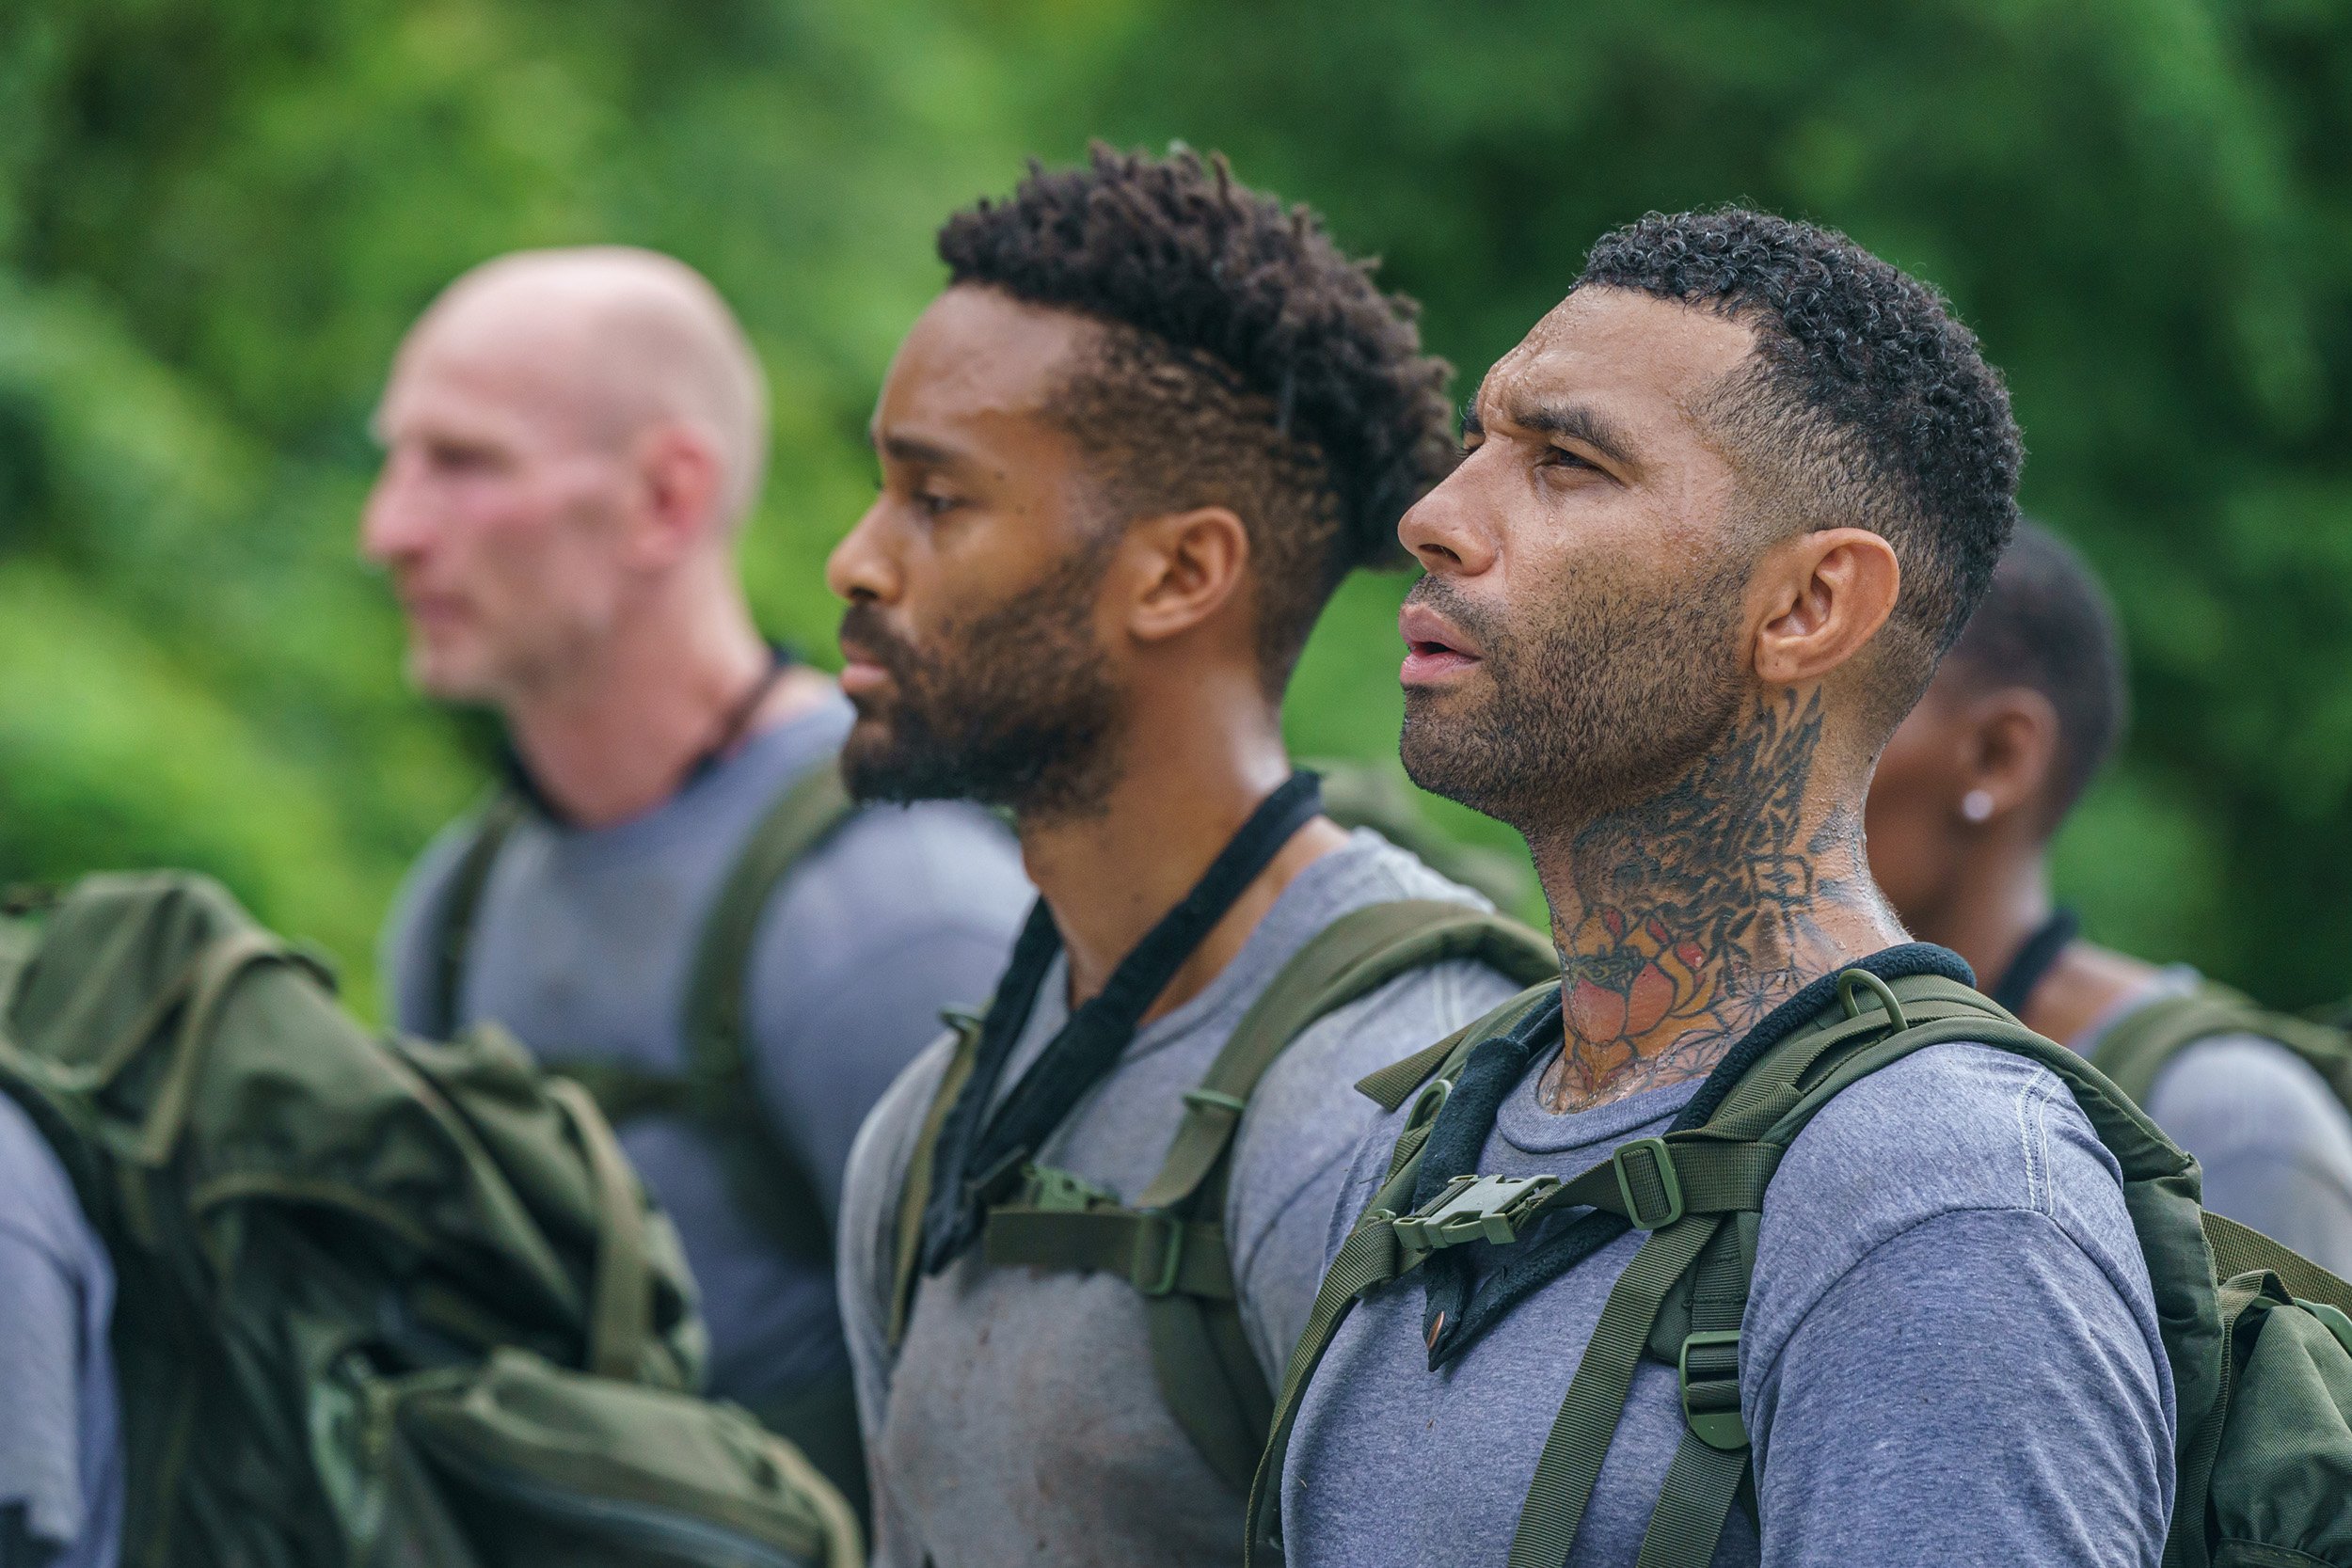  Recruit No 12: Gareth Thomas, No 3: Teddy Soares, and No 5: Jermaine Pennant  Episode 3: Resilience  Minnow Films / Channel 4 